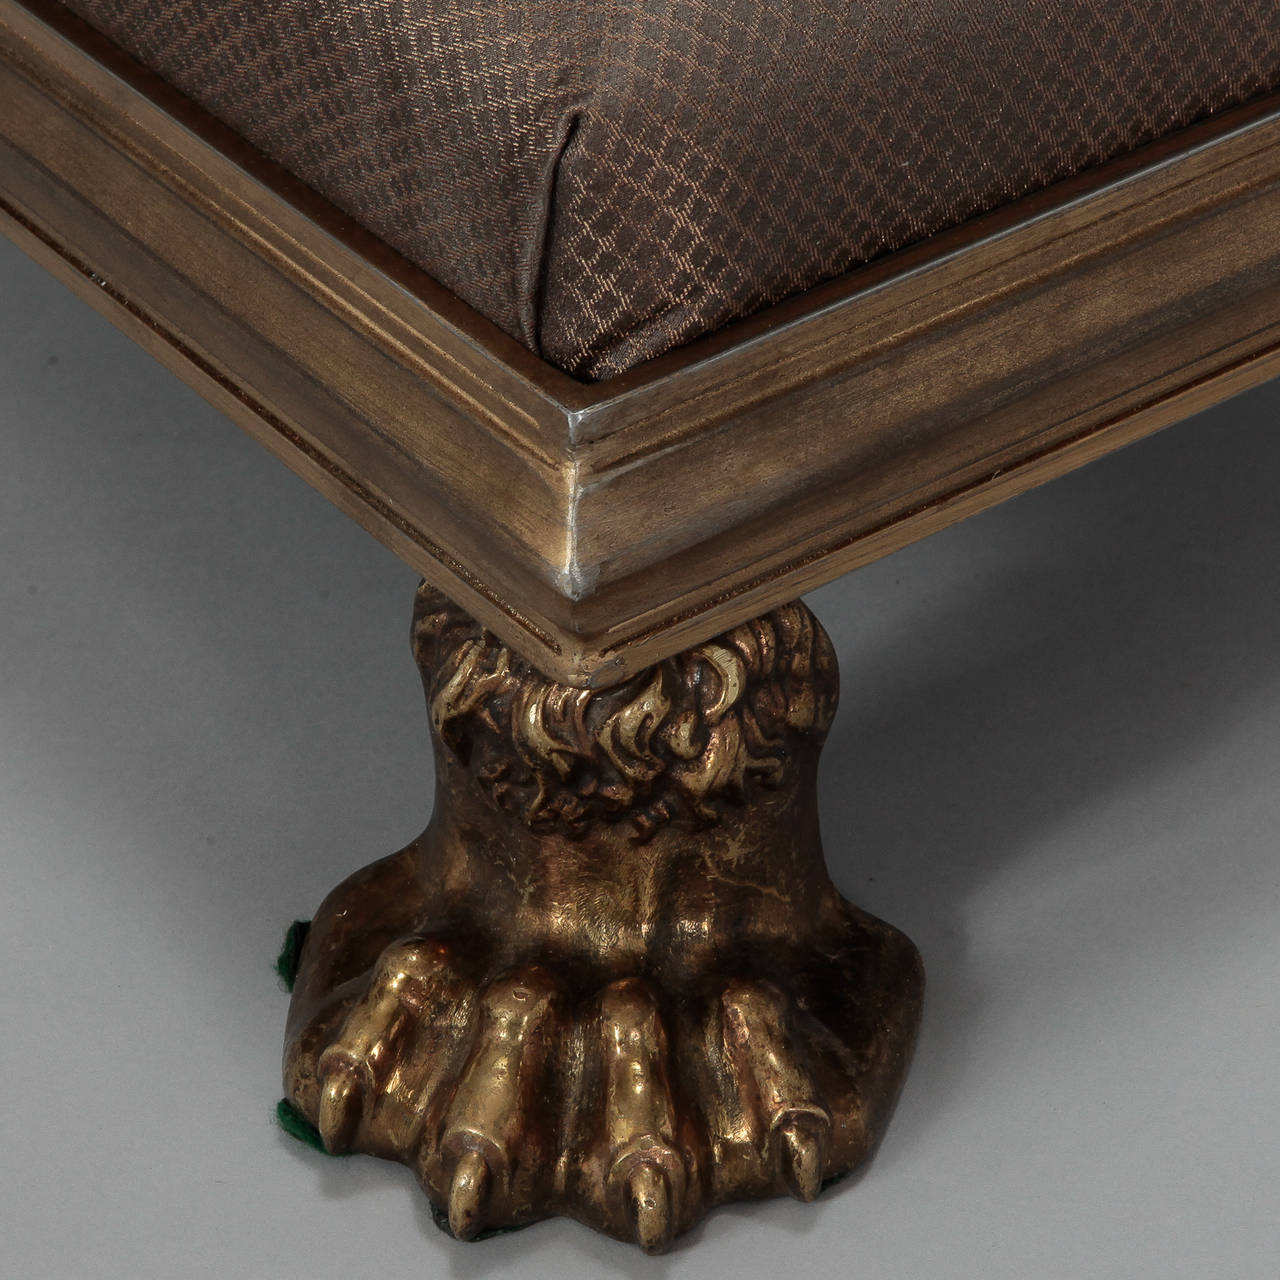 European 19th Century Brass Lion Claw Furniture Feet made into a Foot Stool